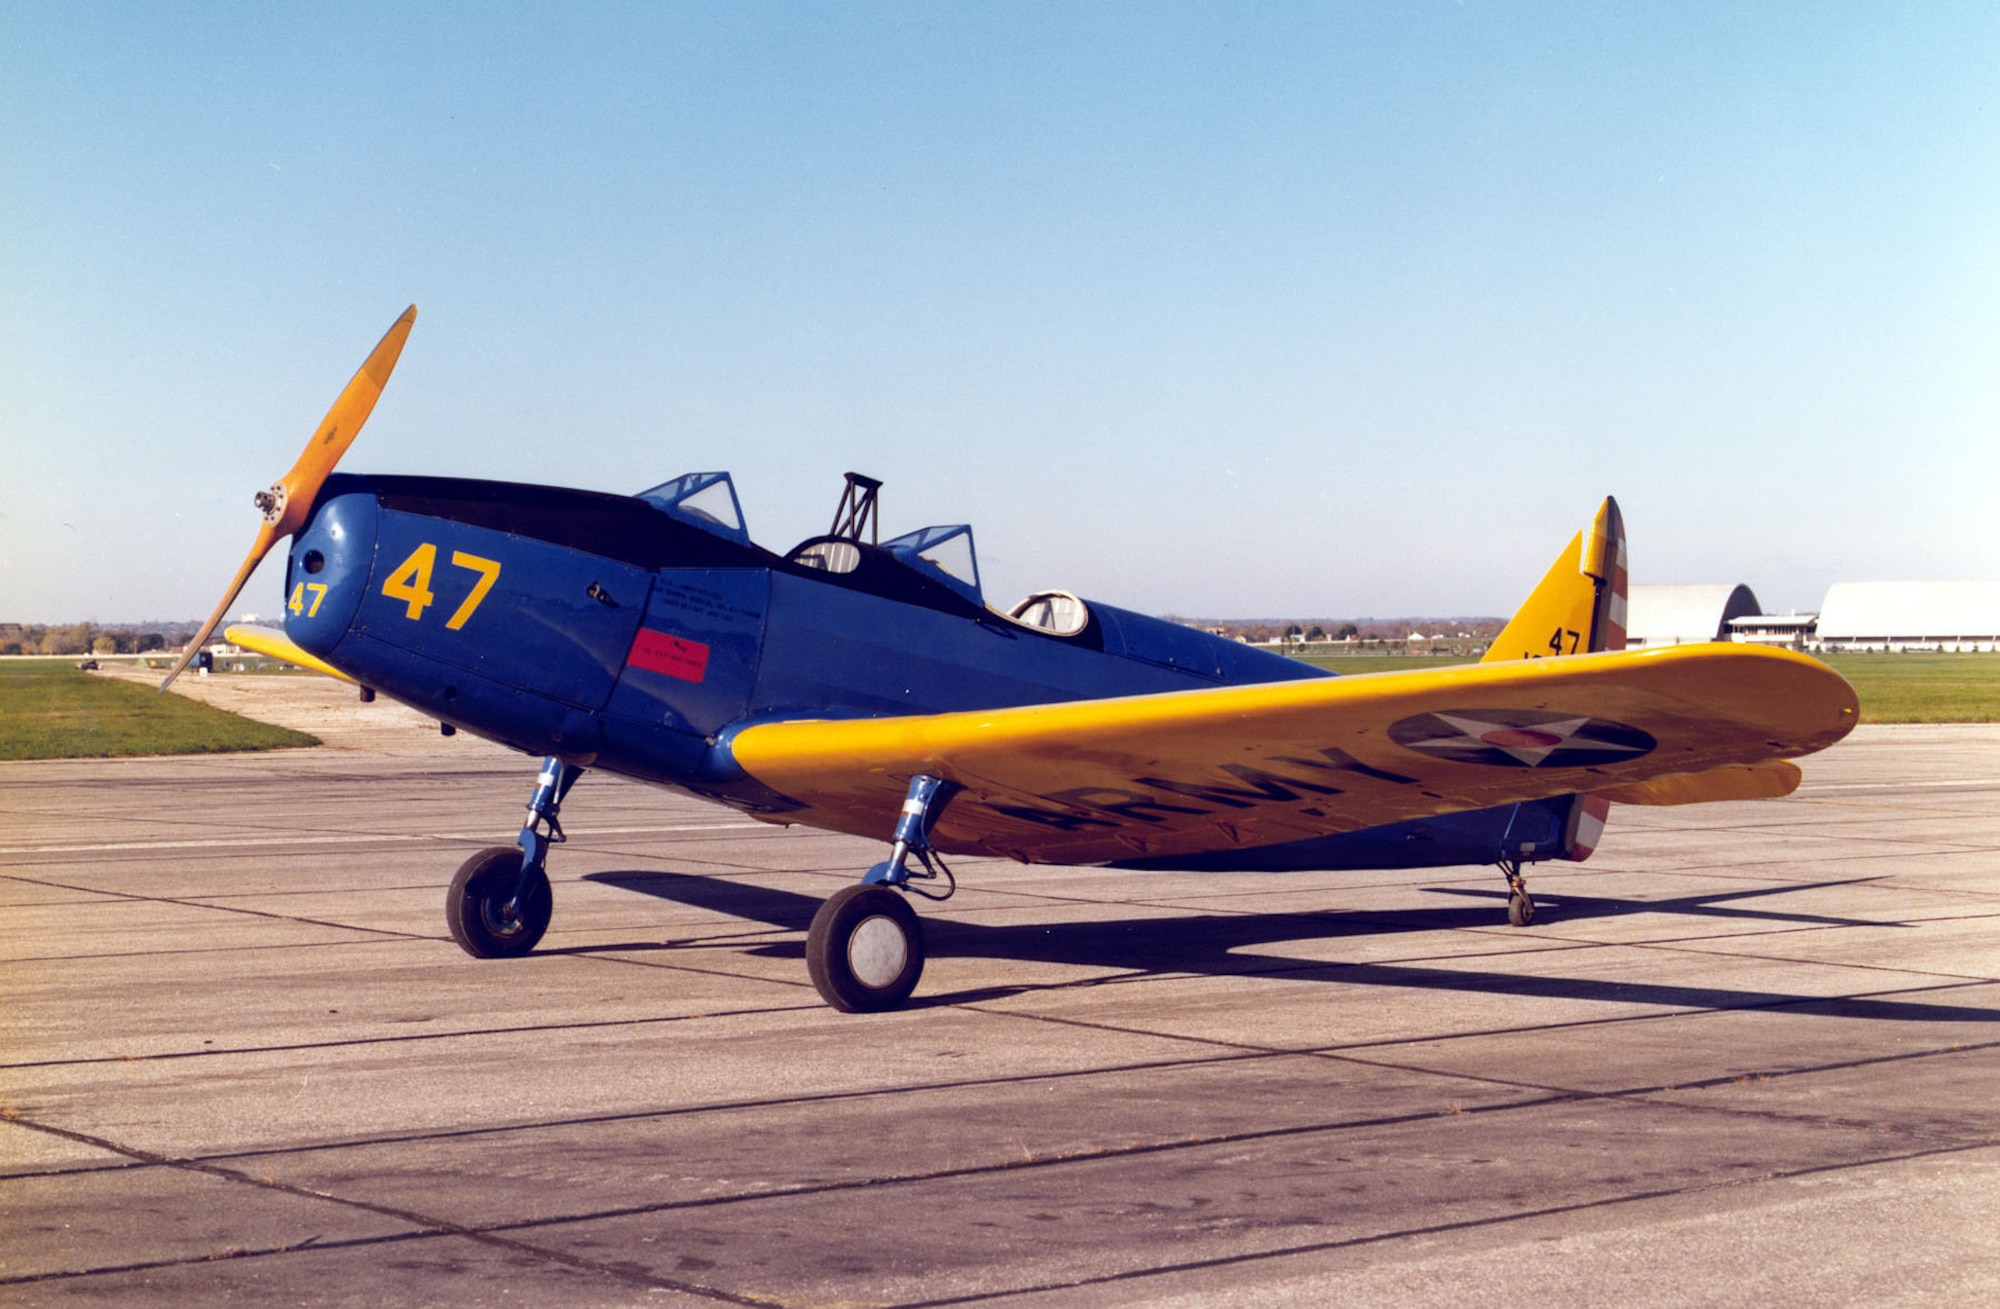 DAYTON, Ohio -- Fairchild PT-19A Cornell at the National Museum of the United States Air Force. (U.S. Air Force photo)